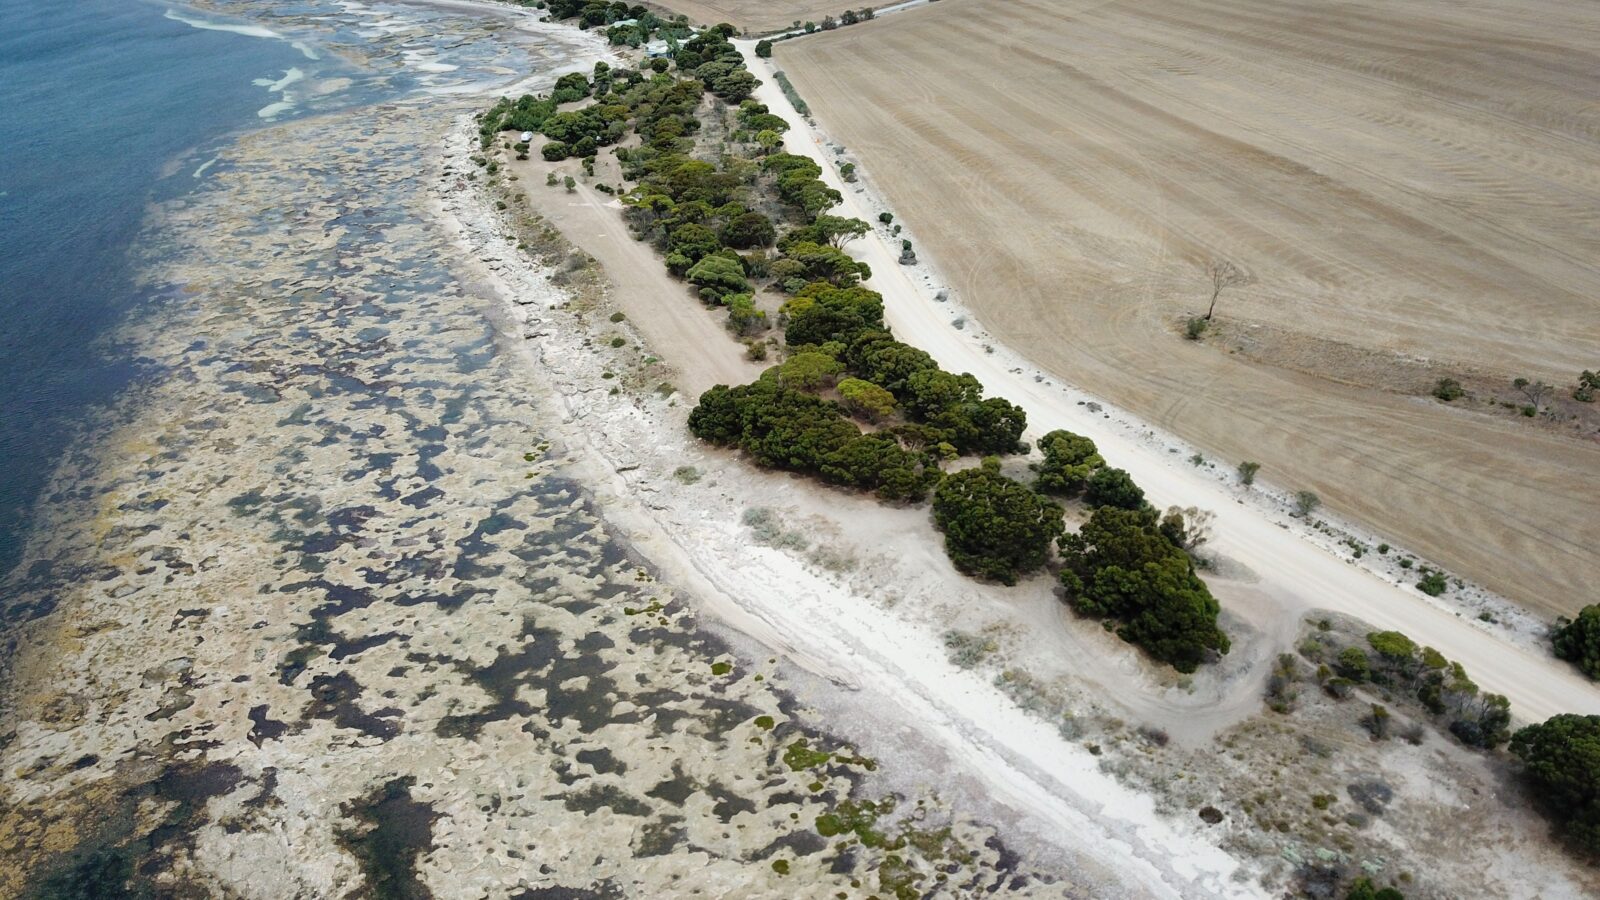 Drone view of coastline with trees and shallow reef